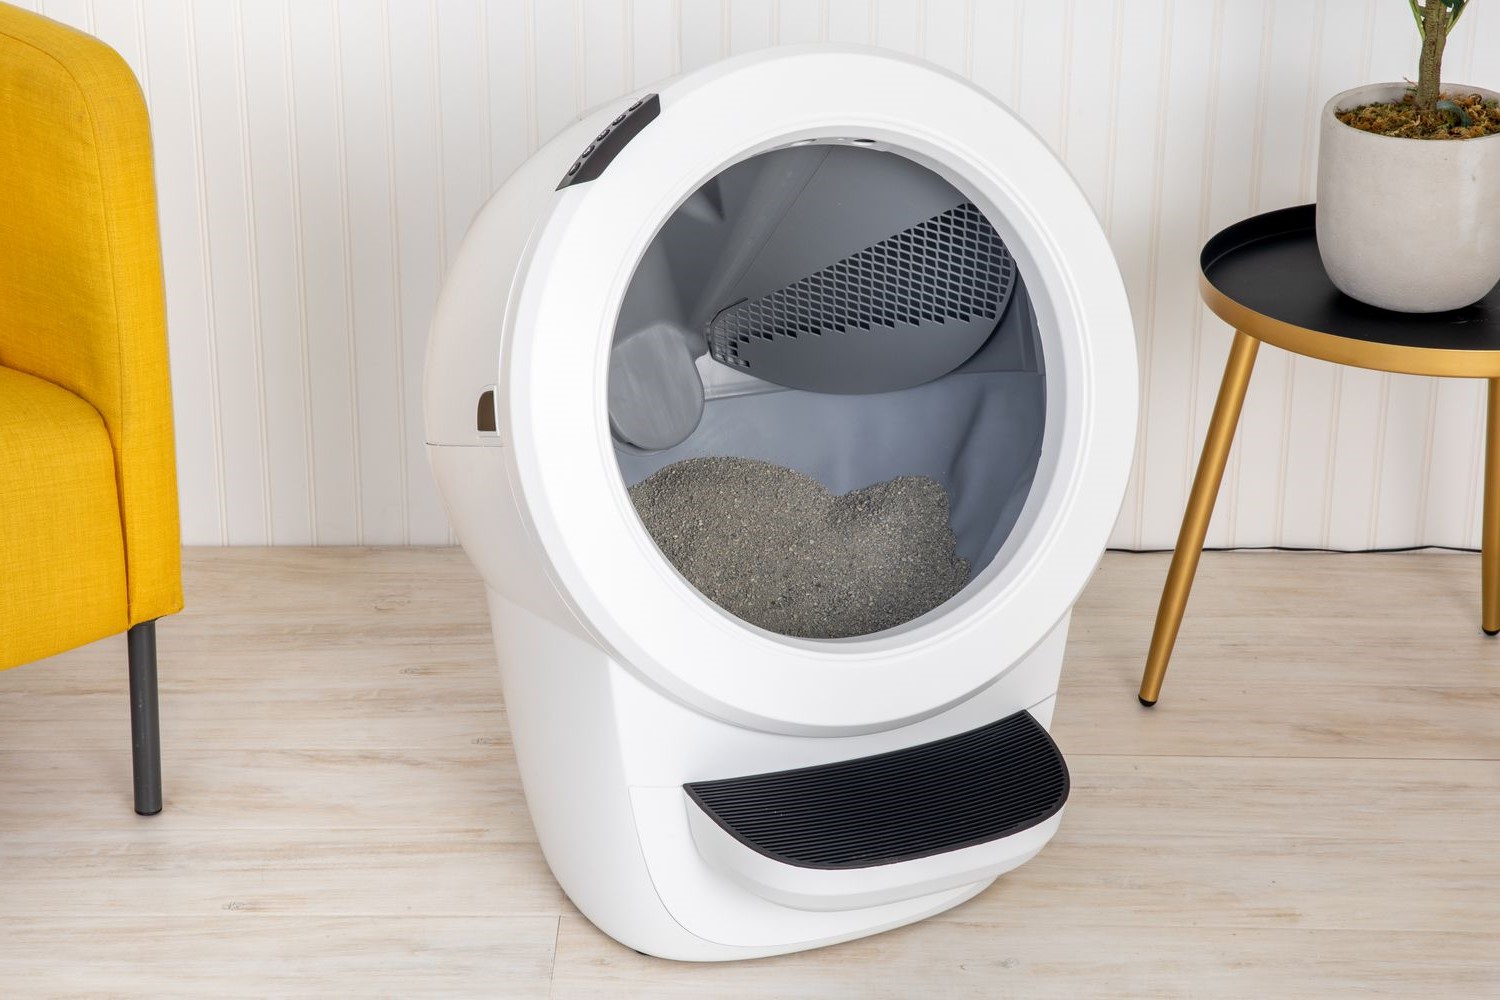 How Does A Self-Cleaning Litter Box Work